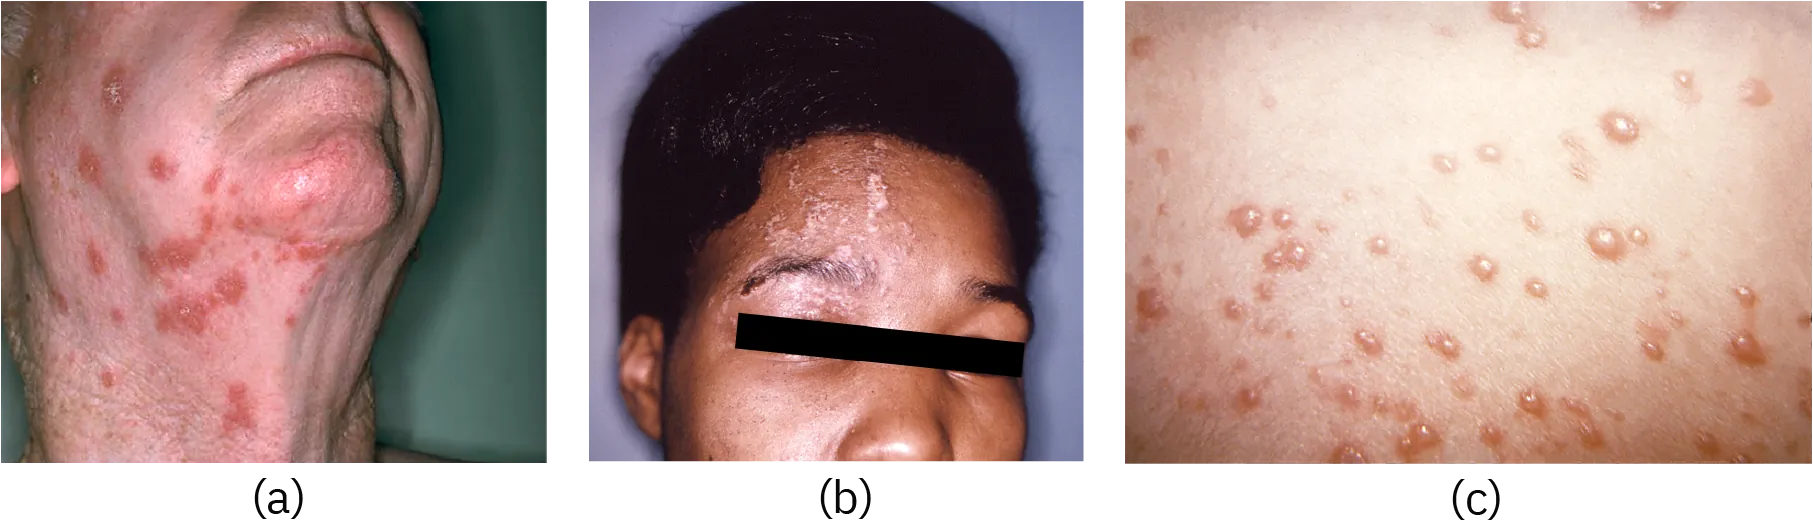 a) Large red spots on an adult’s neck. b) Bumps on an adult's face. c) Red bumps on skin.